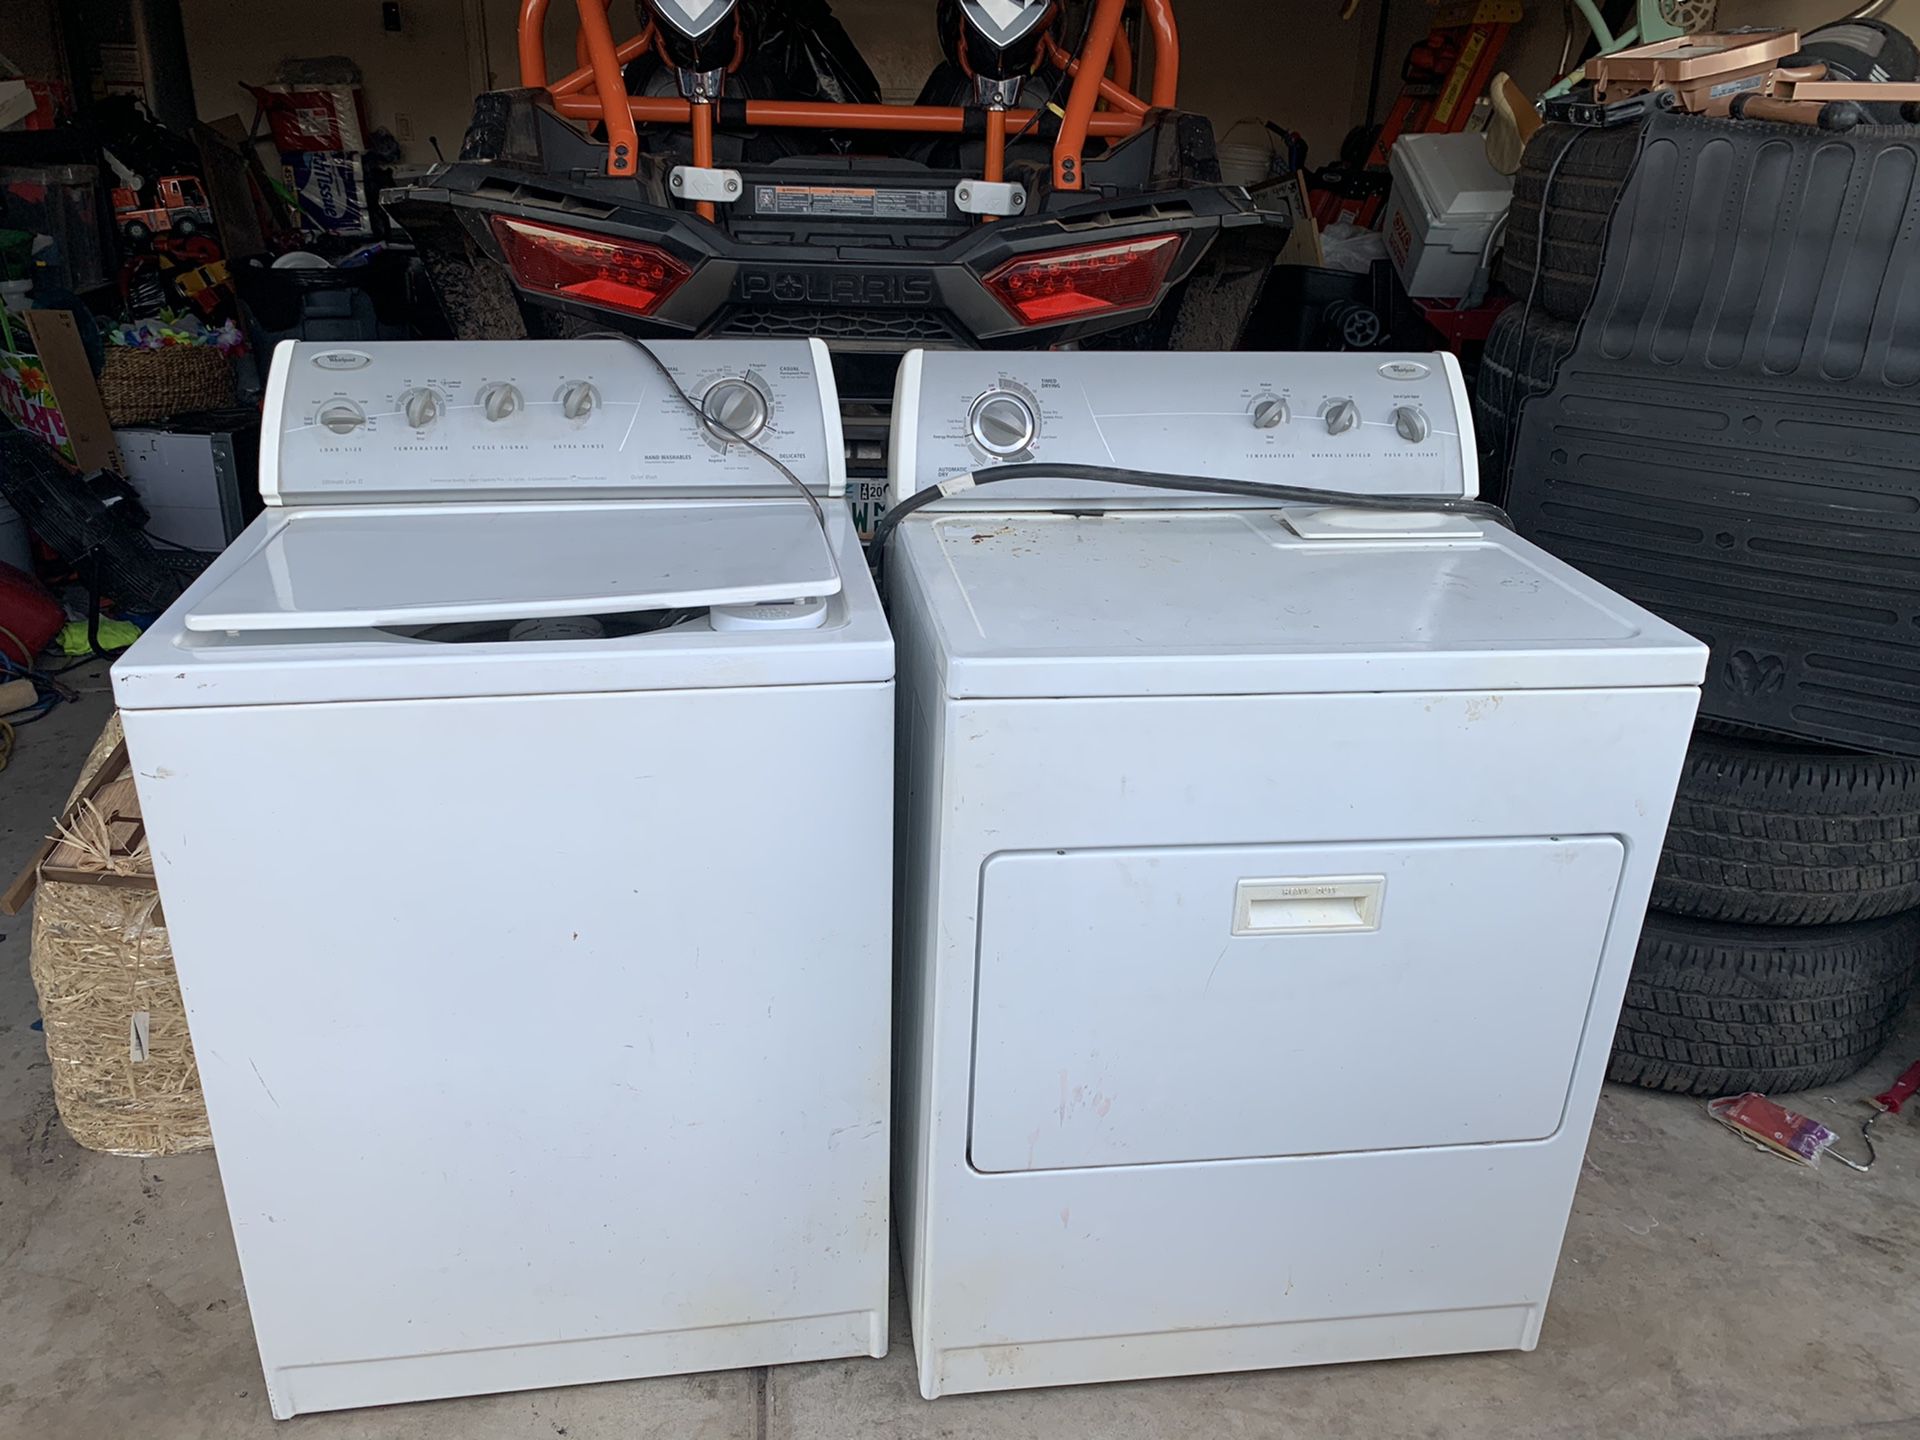 Free washer dryer and over the range microwave